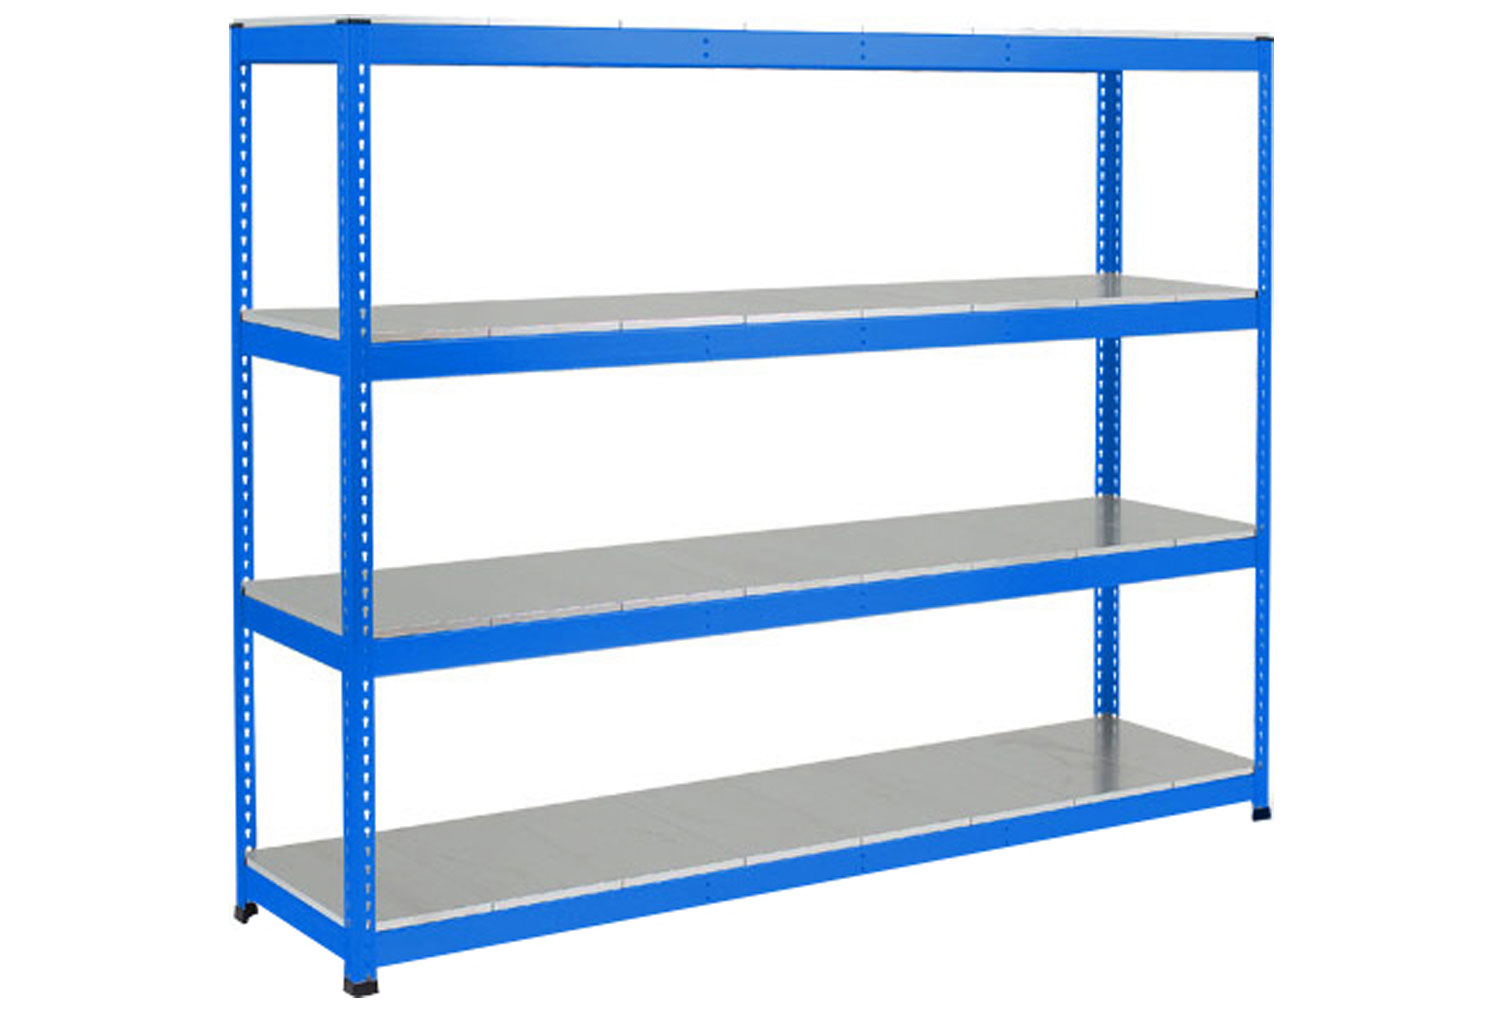 Rapid 1 Heavy Duty Shelving With 4 Galvanized Shelves 2440wx2440h (Blue), Express Delivery